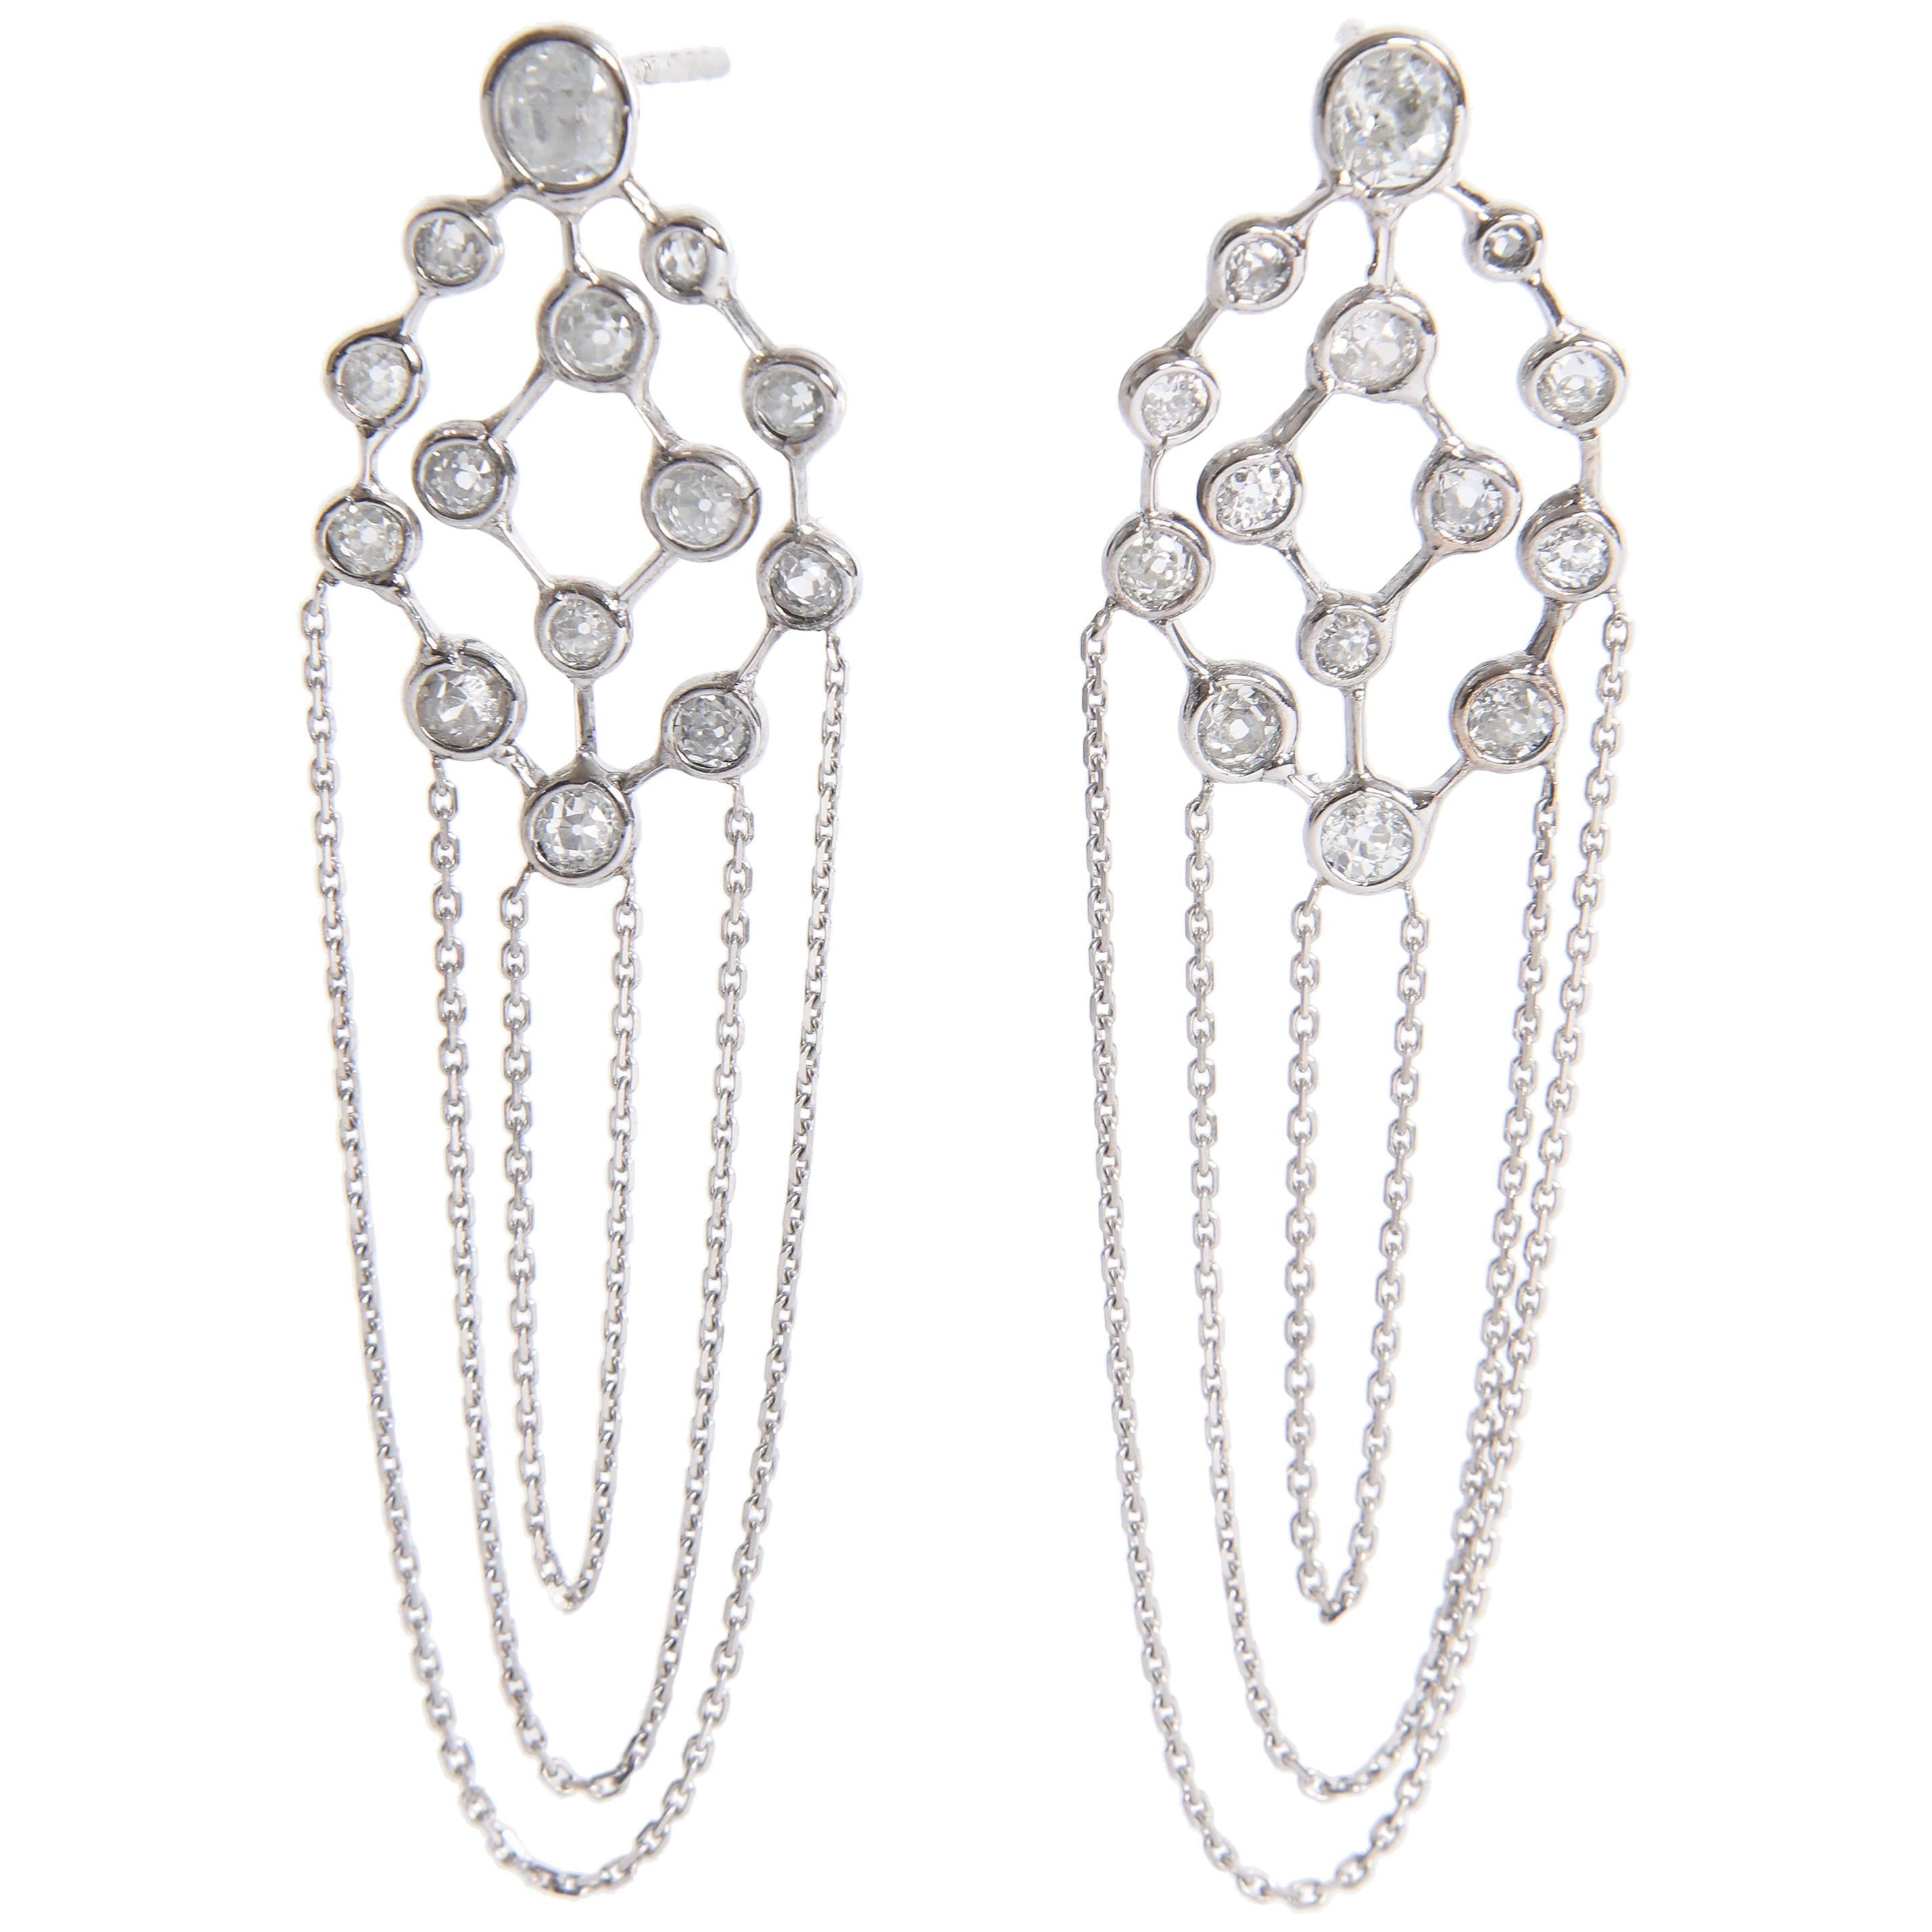 Old Cut Diamonds and 18 Karat White Gold Refines Earrings by Marion Jeantet For Sale